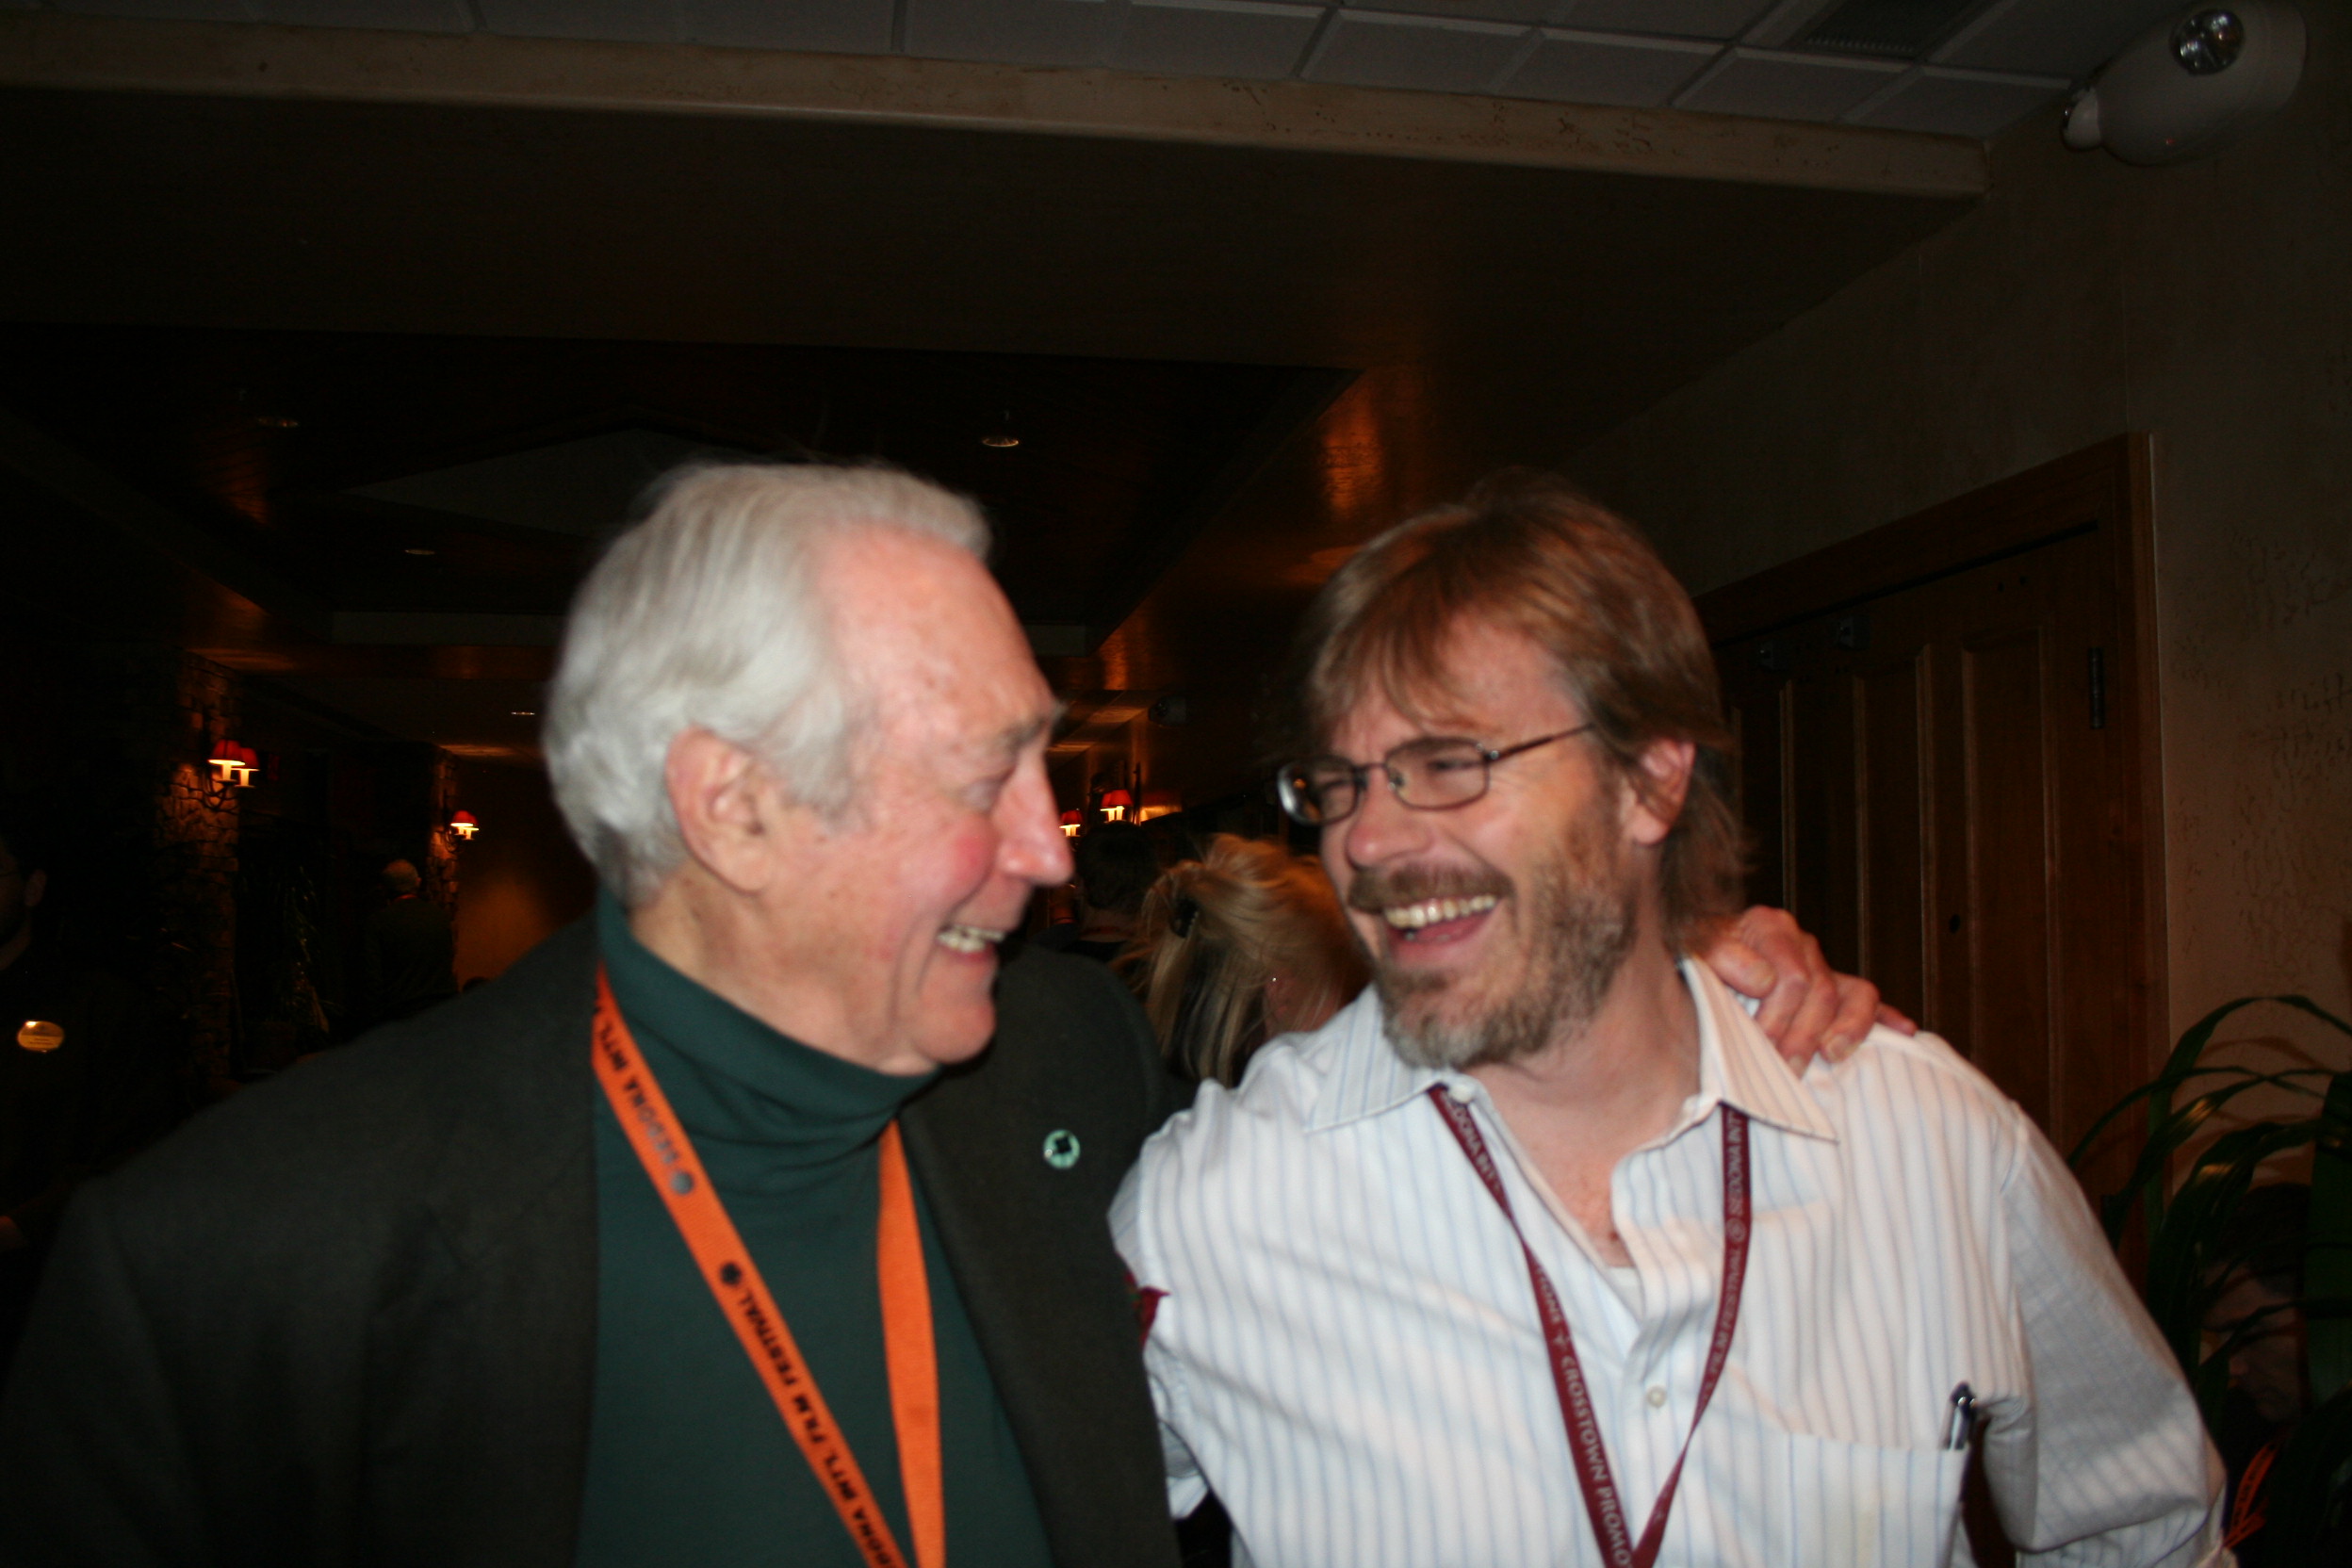 Sharing a laugh with James Karen at the 2010 Sedona International Film Festival.